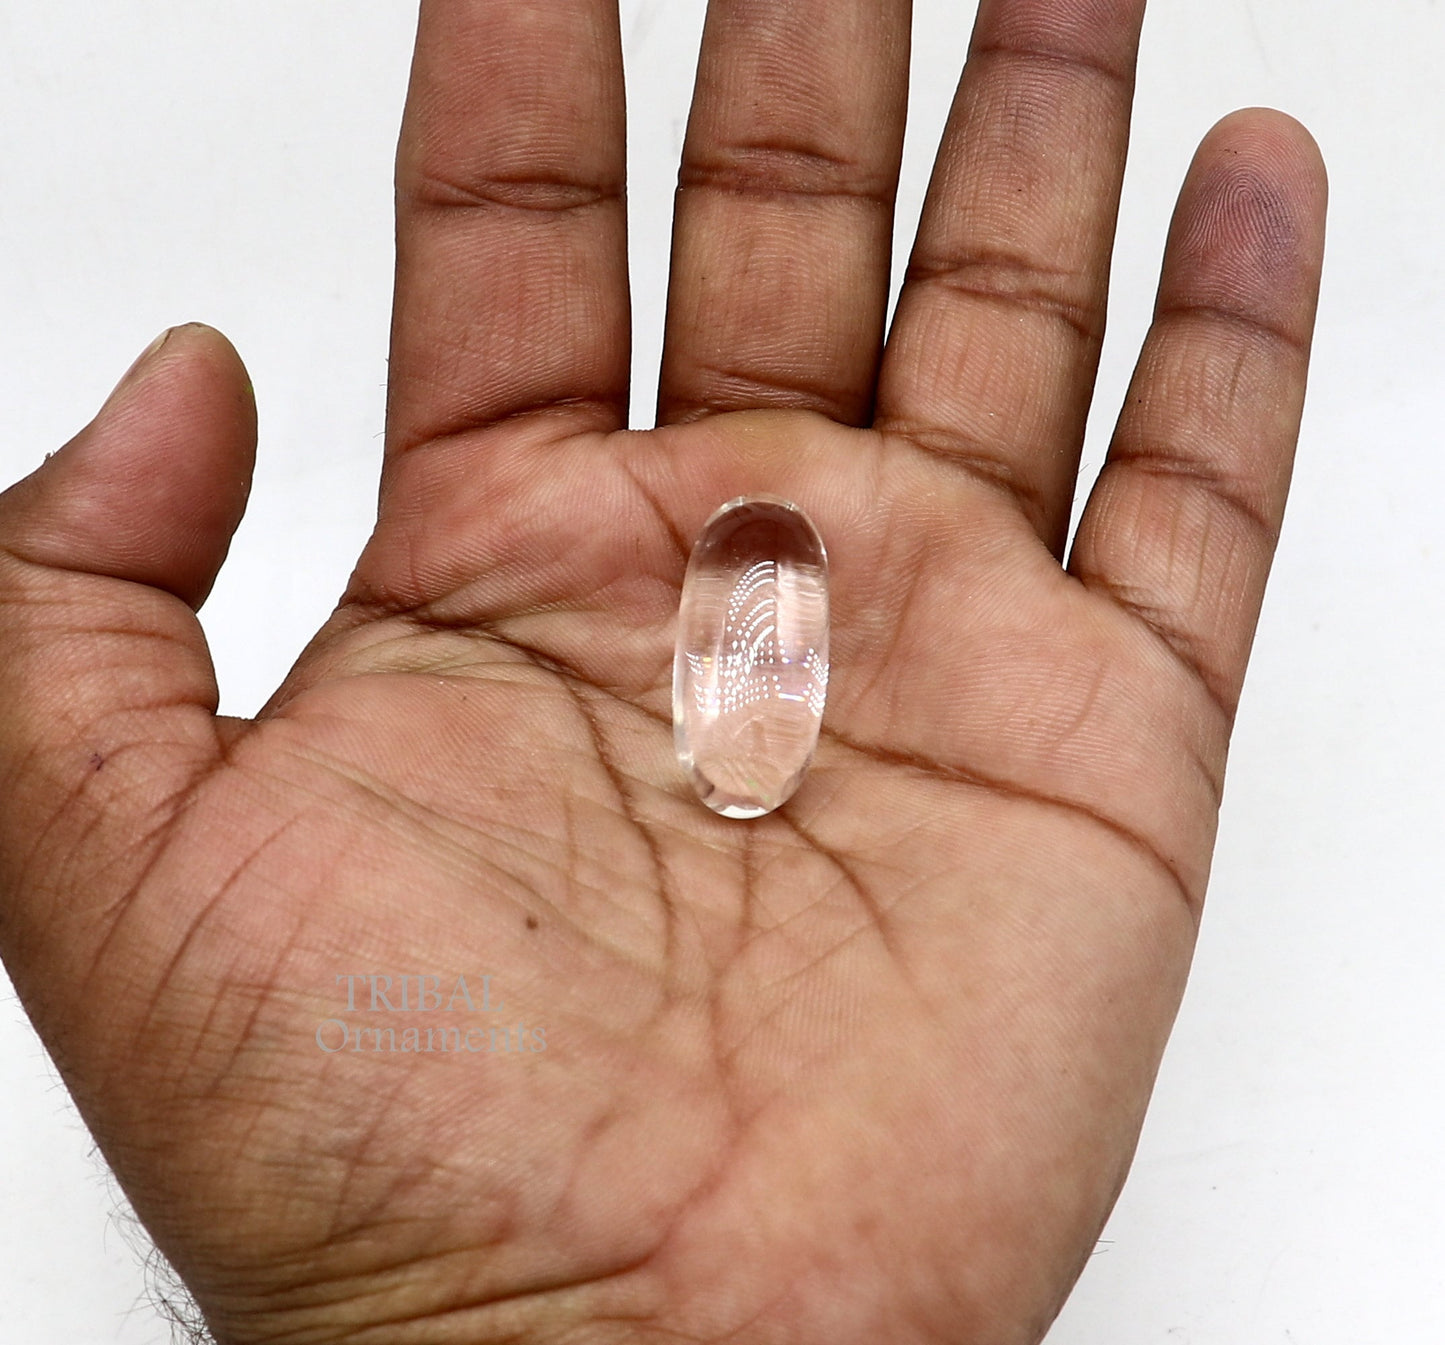 1.2" Natural sphatik crystal stone divine lor shiva lingam statue, amazing sphatik lingam puja article for wealth and prosperity stna27 - TRIBAL ORNAMENTS